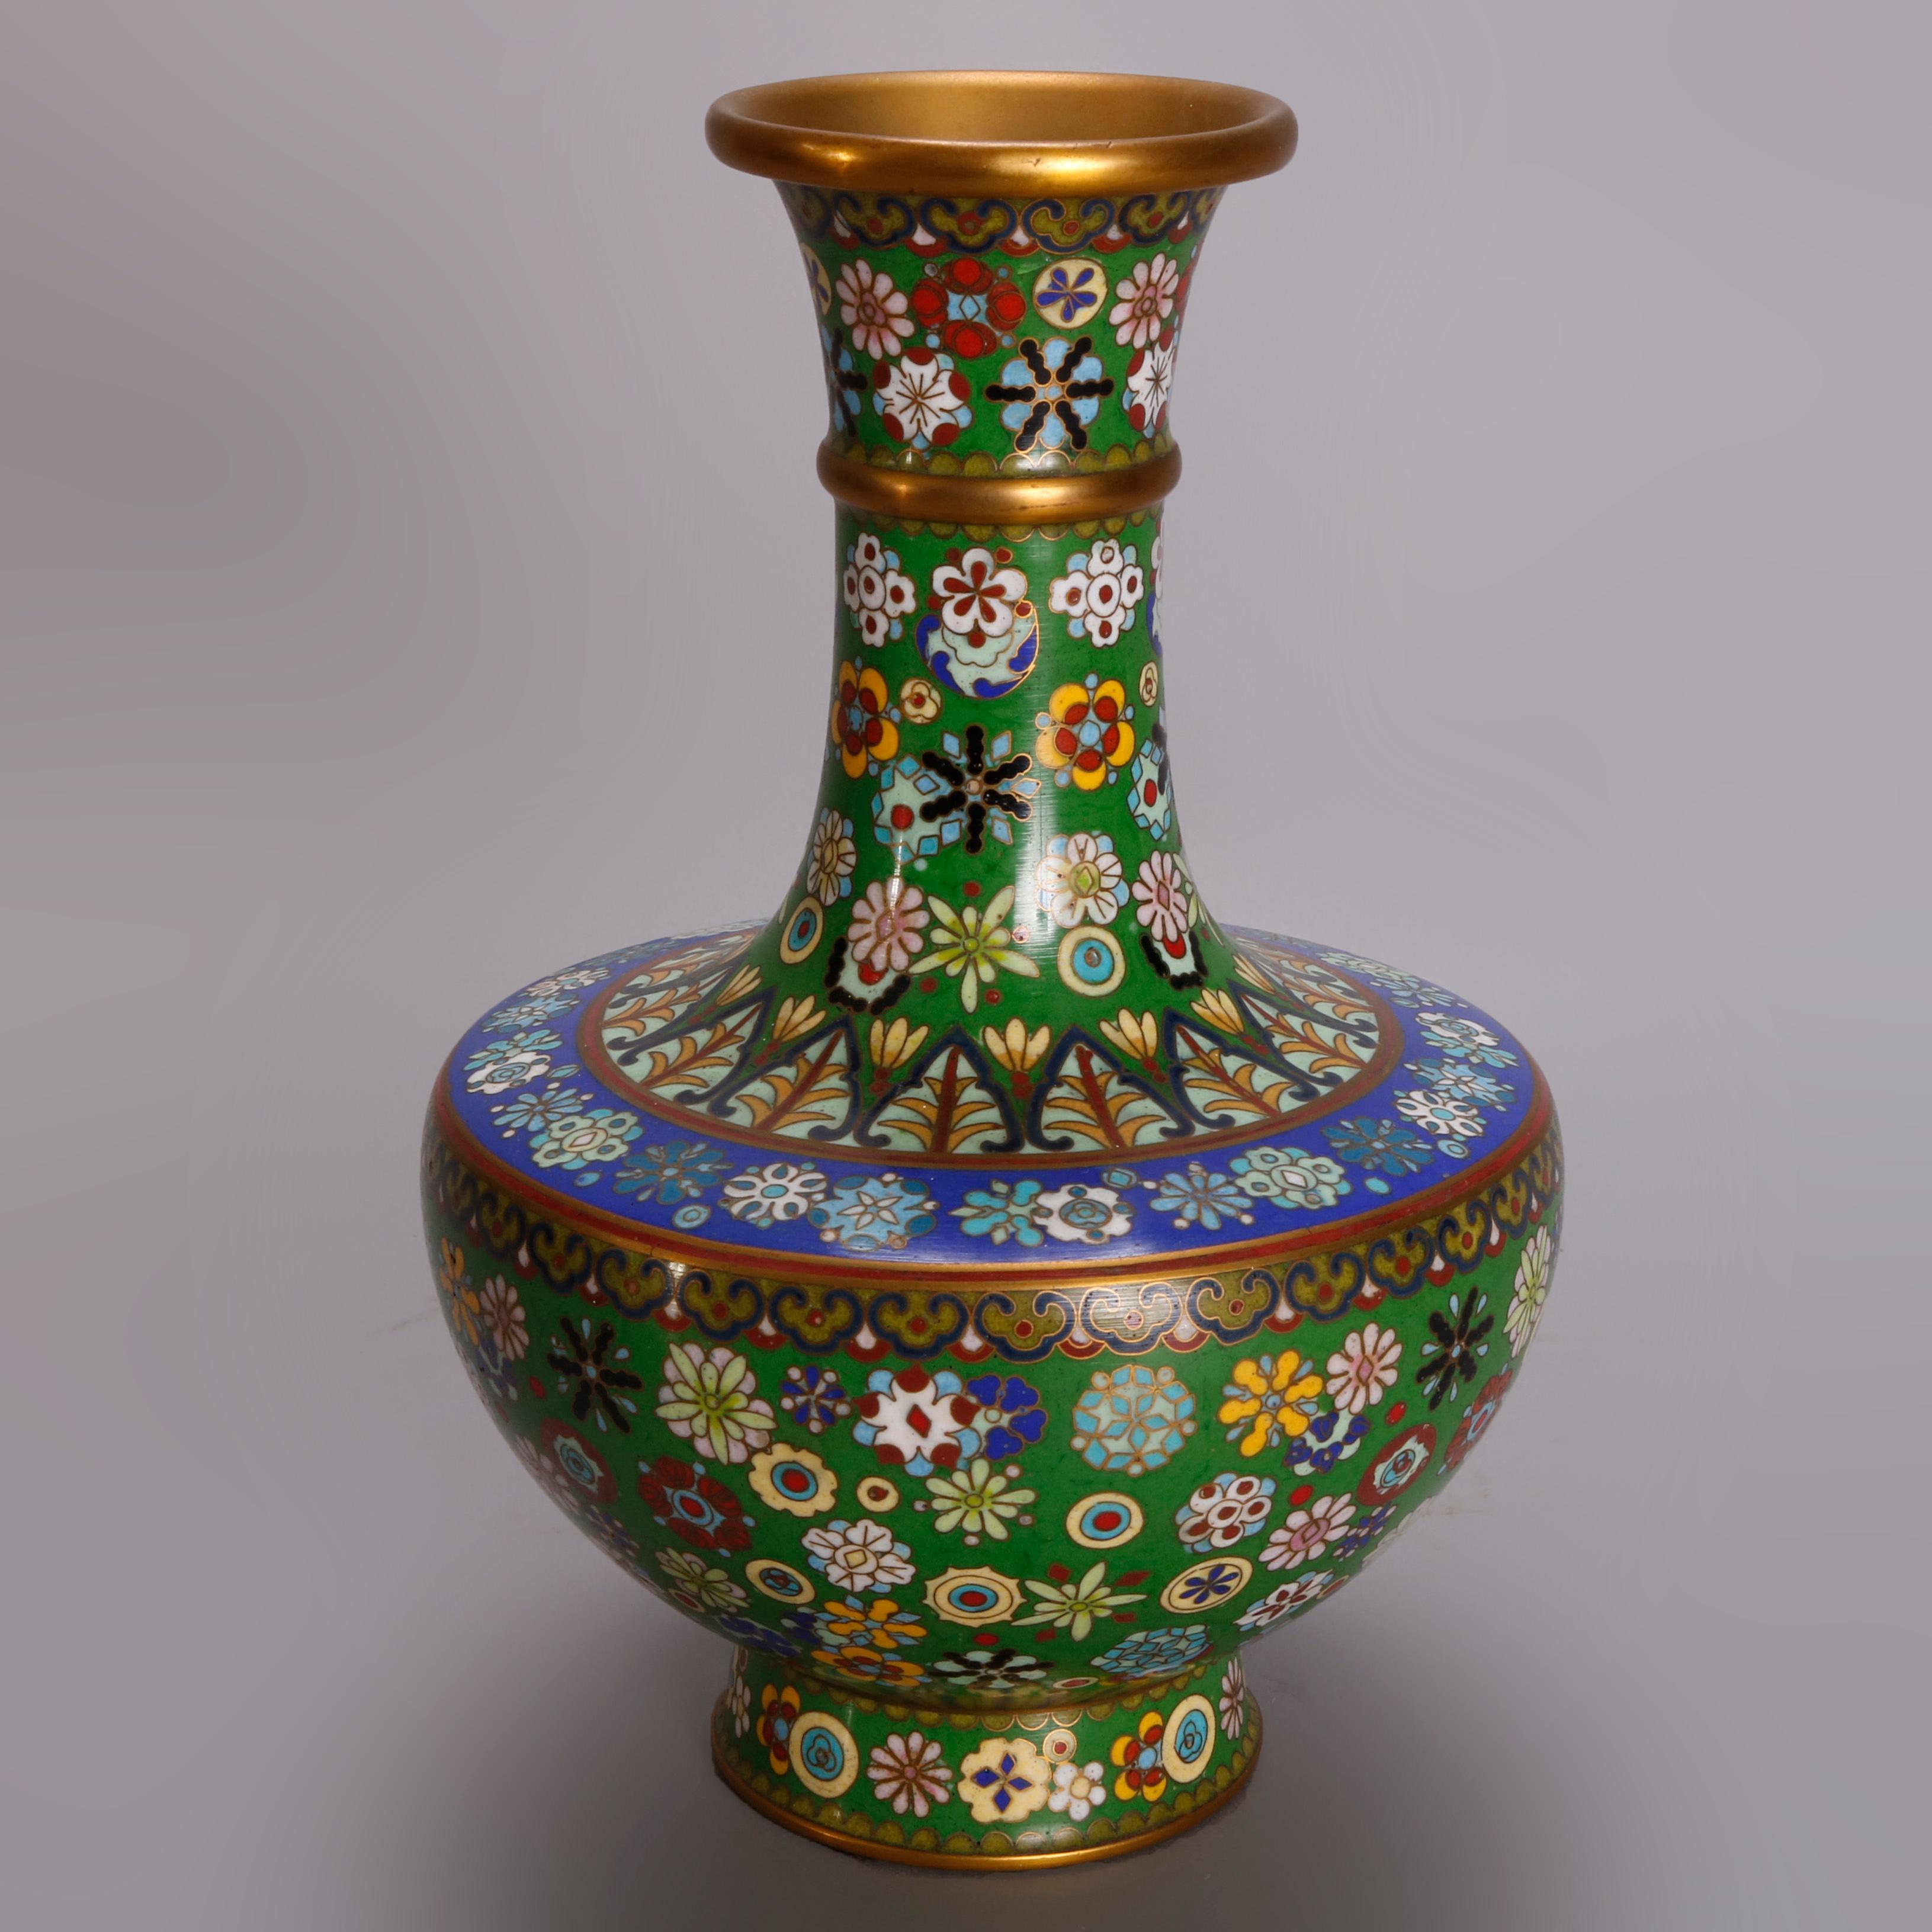 A pair of matching vintage Chinese Cloisonne vases offer urn form with all-over hand enameled floral decoration on emerald green ground with sapphire blue banding, 20th century.

***DELIVERY NOTICE – Due to COVID-19 we have employed